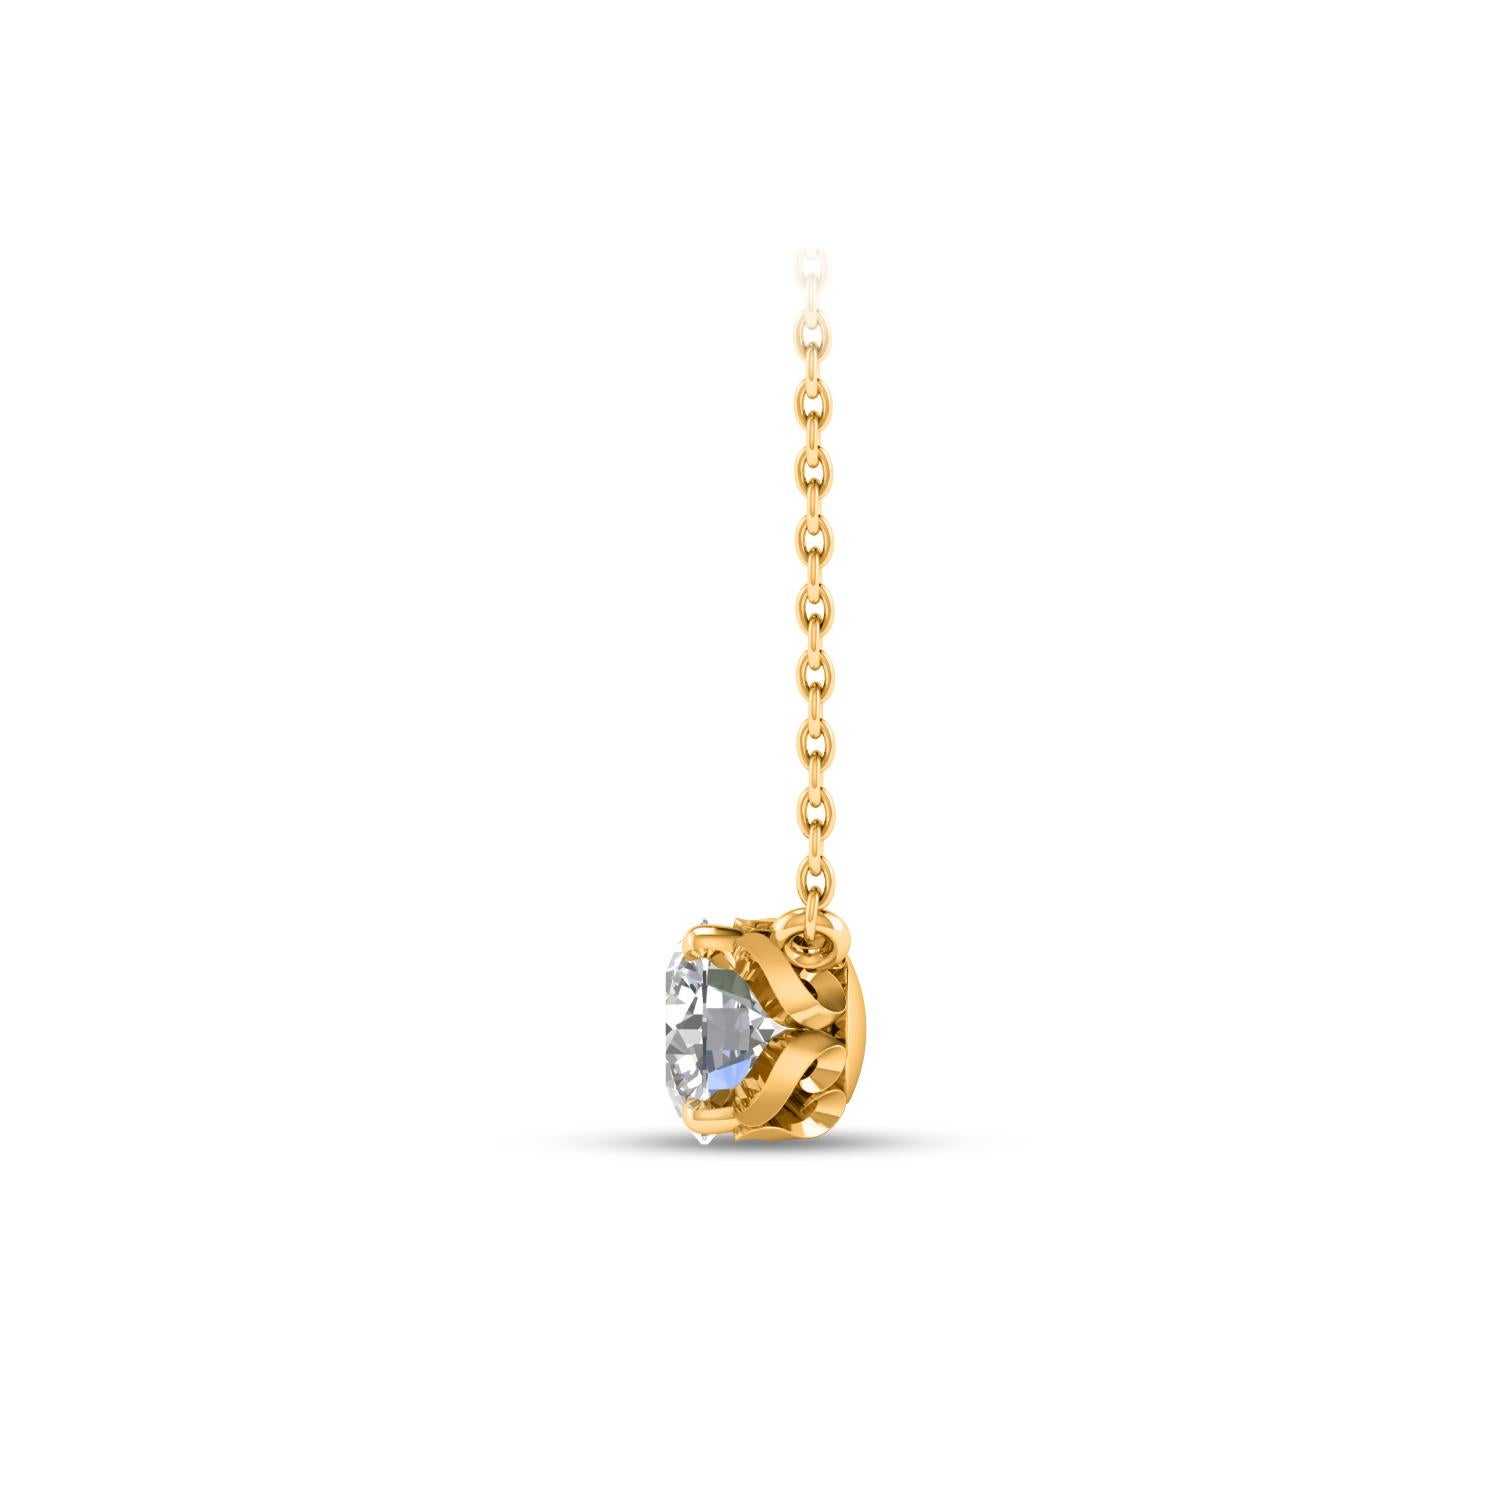  This solitaire diamond necklace features a single, brilliant-cut 0.26 carat diamond in prong setting in 18 KT yellow gold. This elegant necklace includes 20-inch cable chain with extender at 18-inch. This classic necklace will be accompanied with a